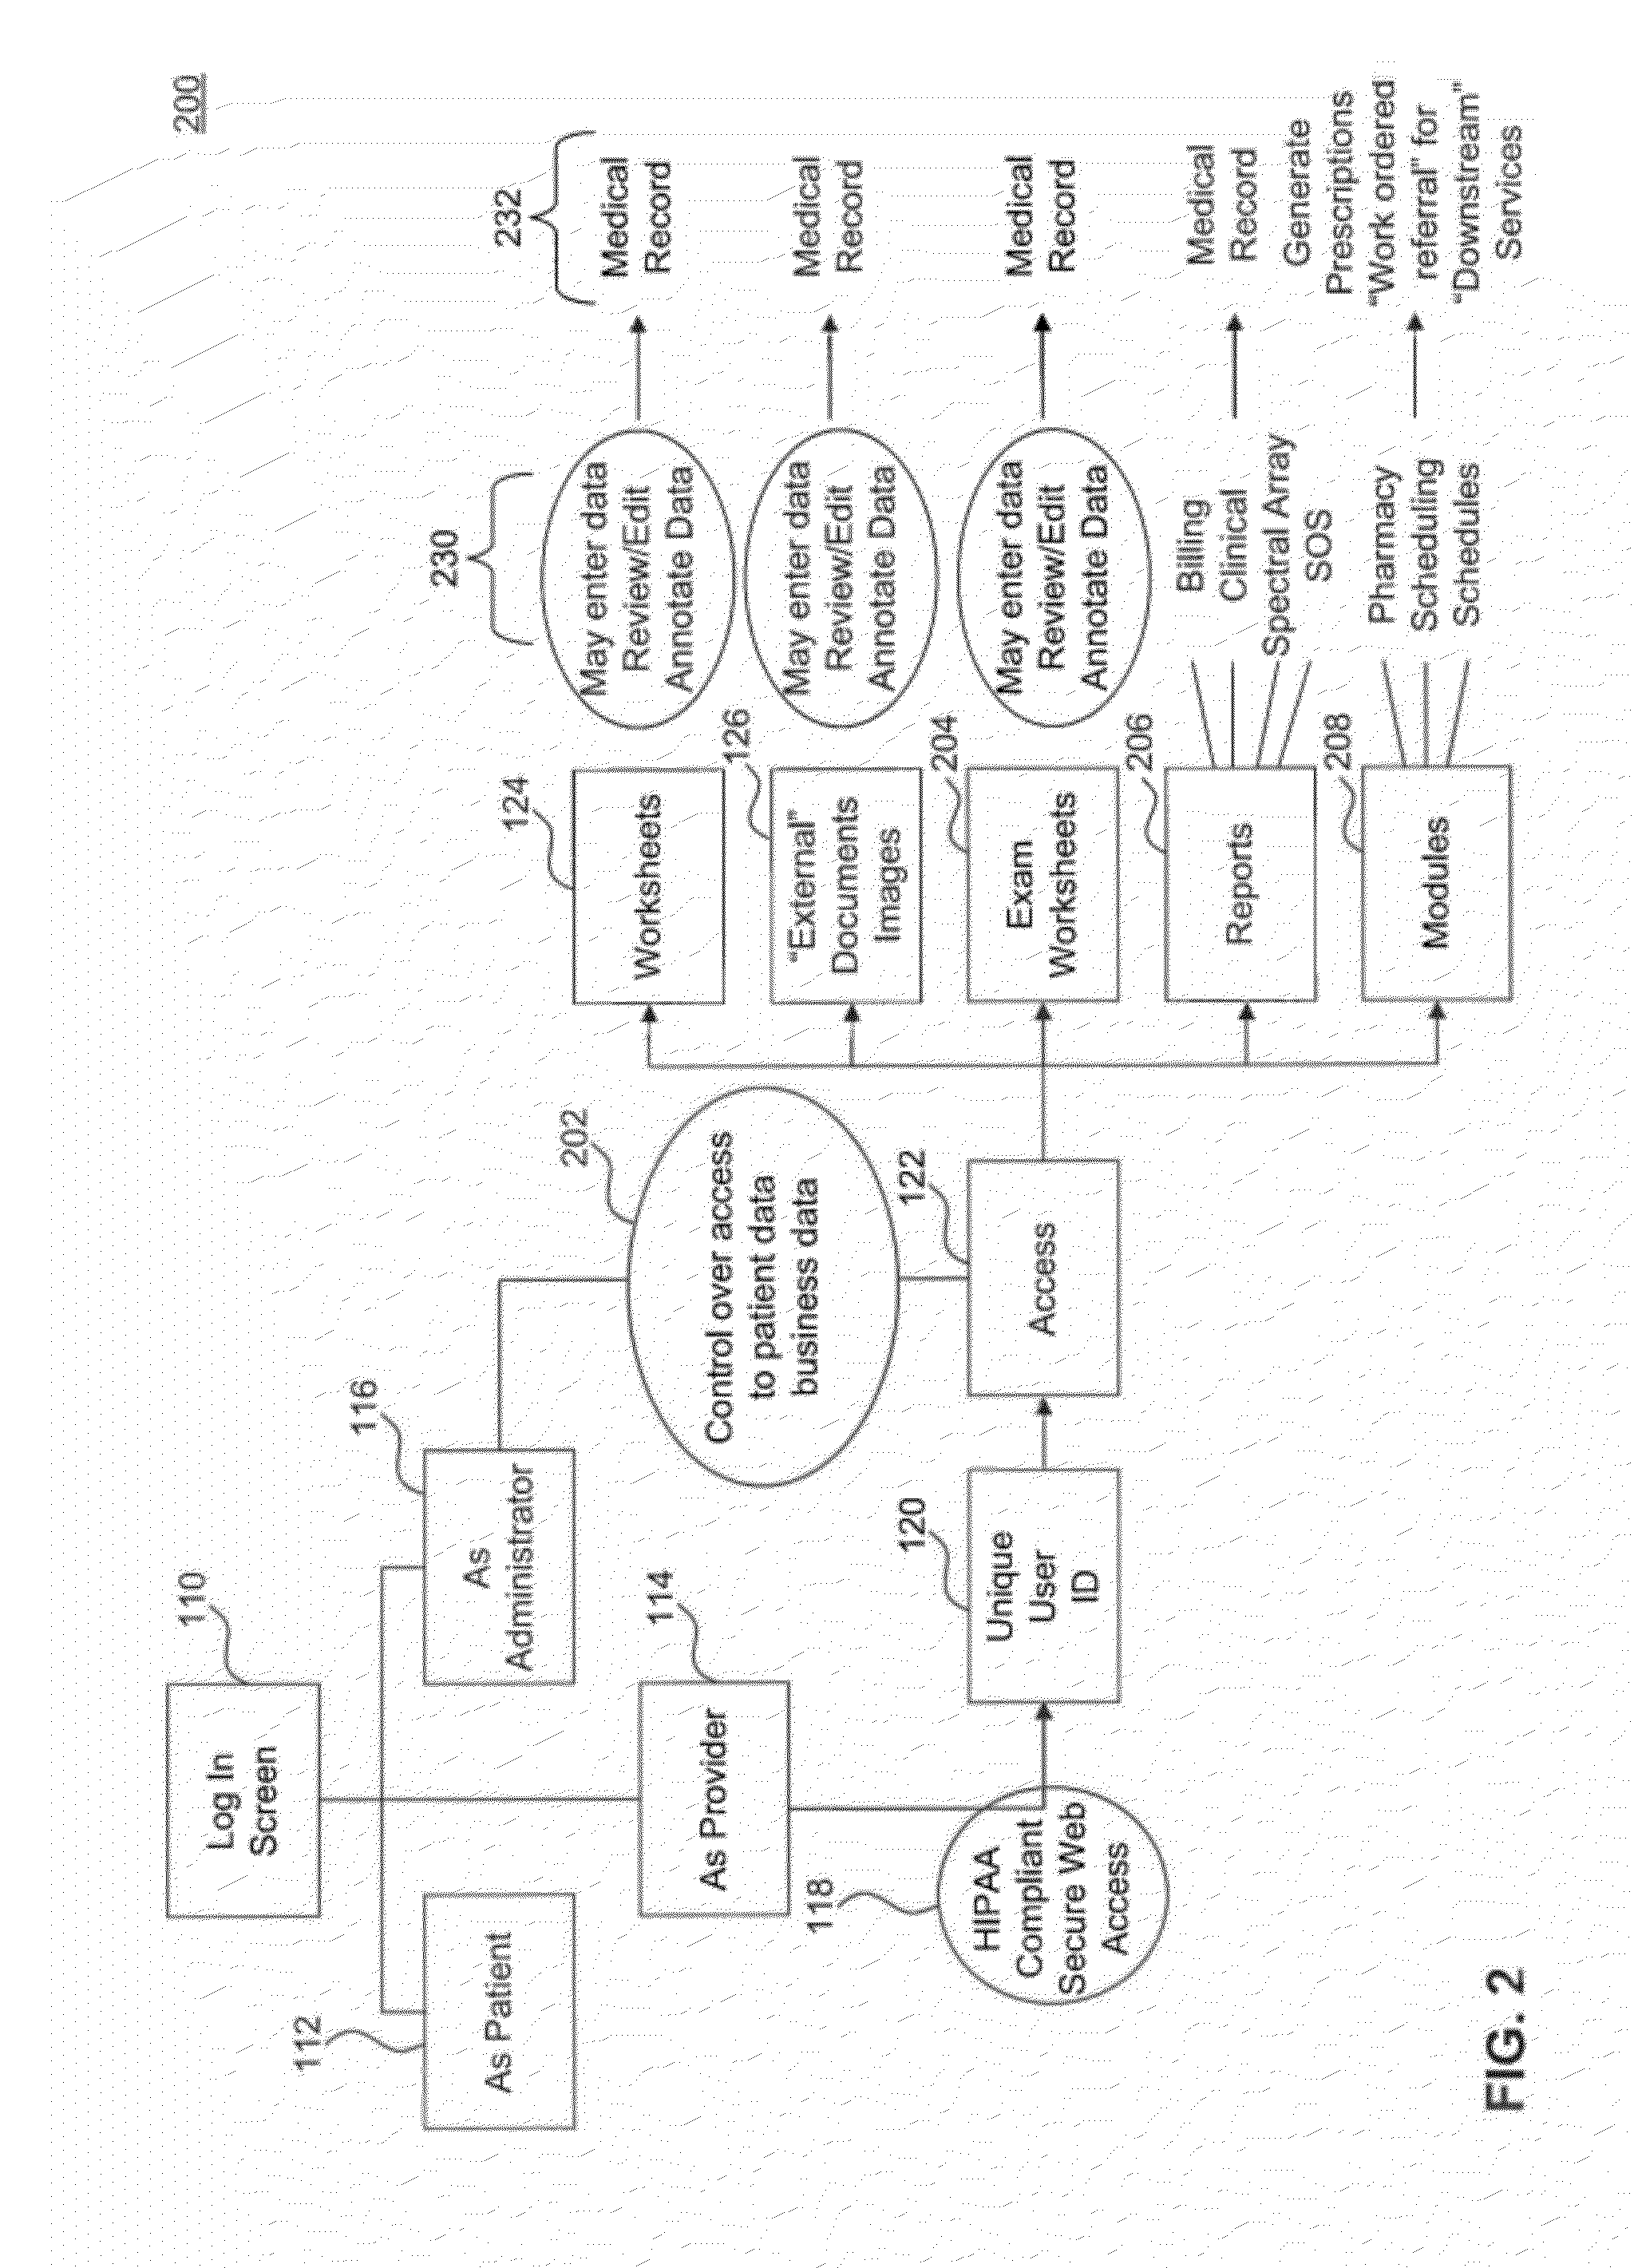 System and method for conveying and processing personal health information